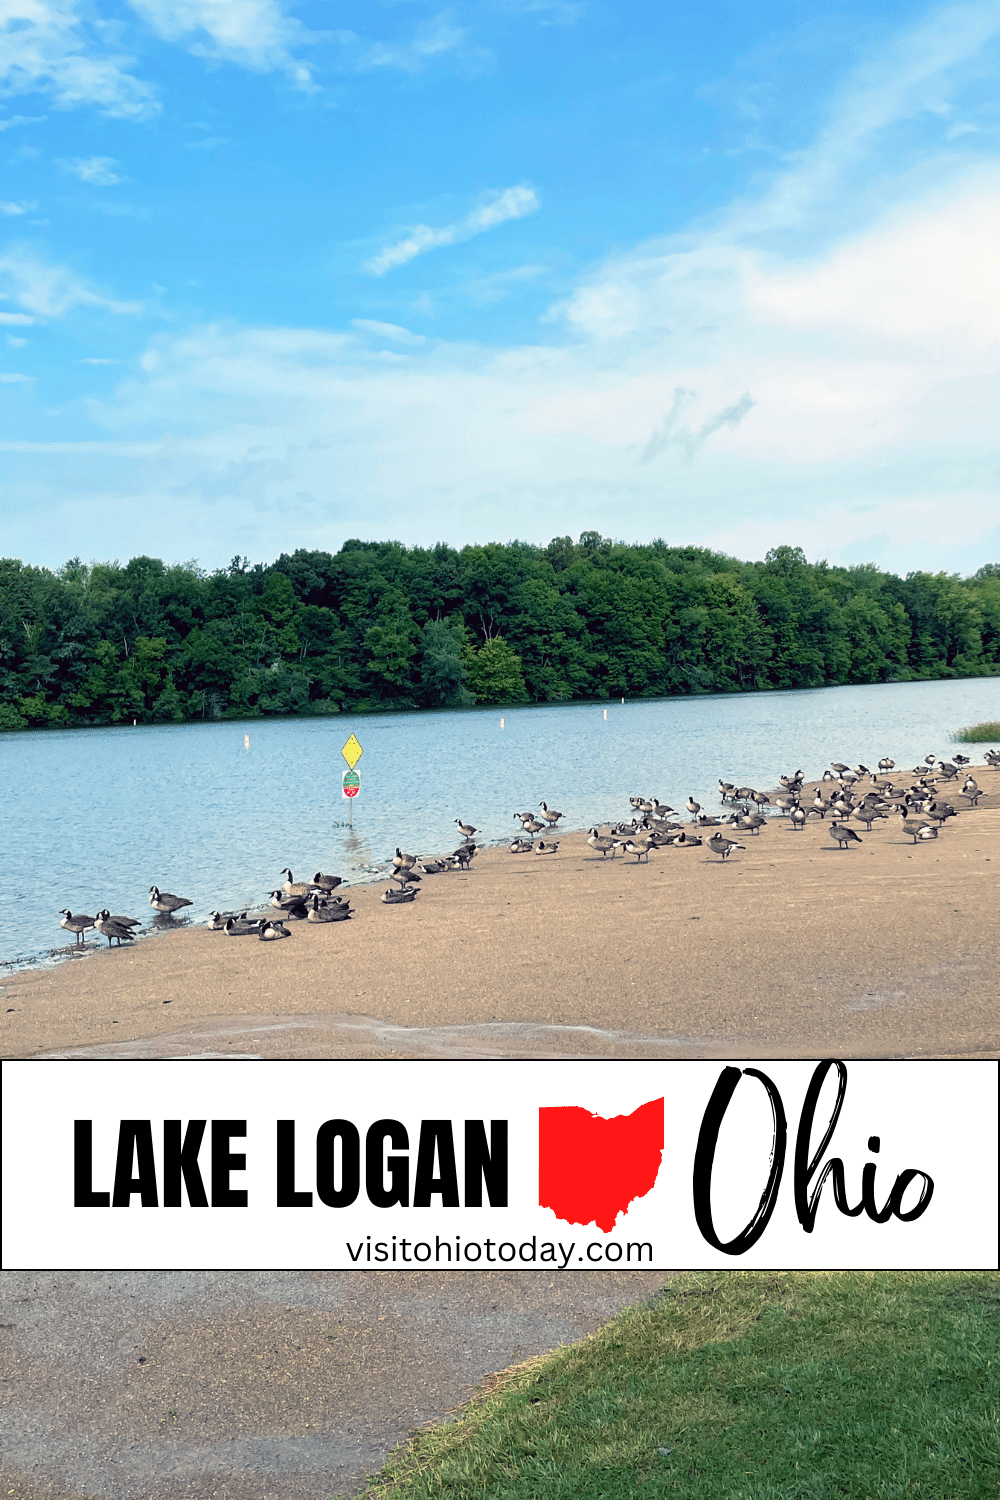 Lake Logan Ohio is a 400 acre lake found in the Hocking Hills area of Southeastern Ohio.  The lake offers boating, a beach, hiking, fishing and more.